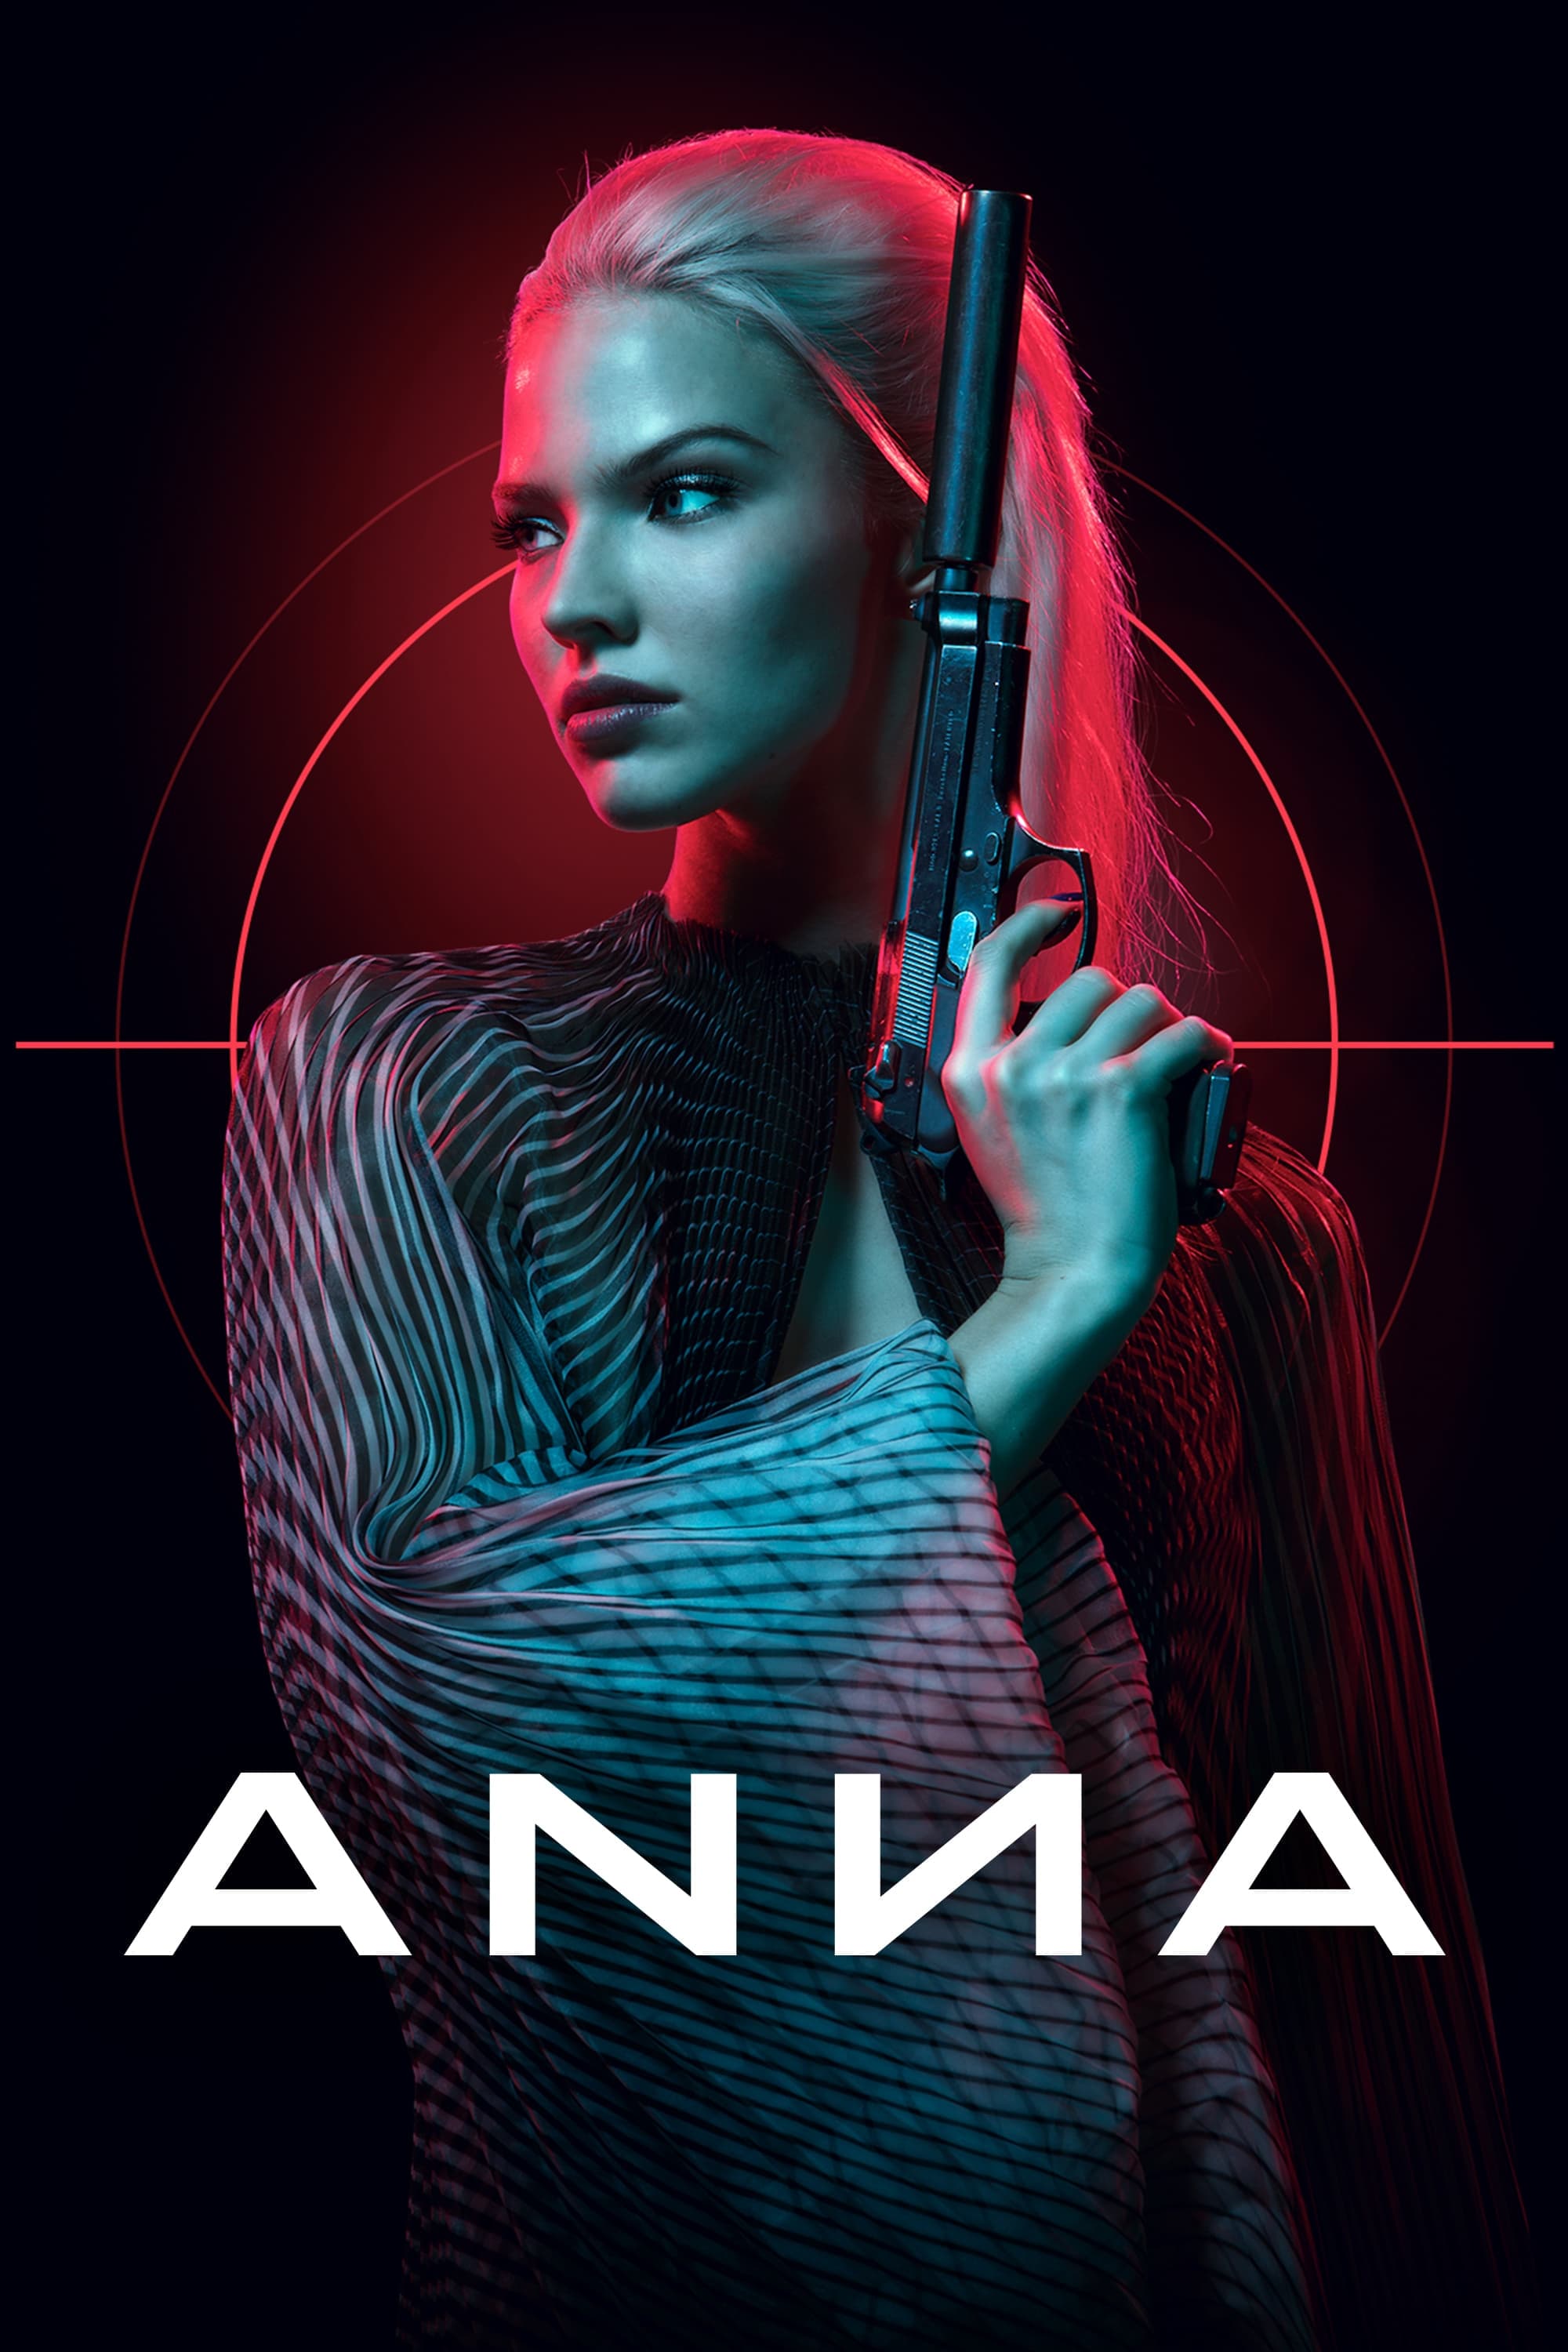 anna movie review 2019 rotten tomatoes